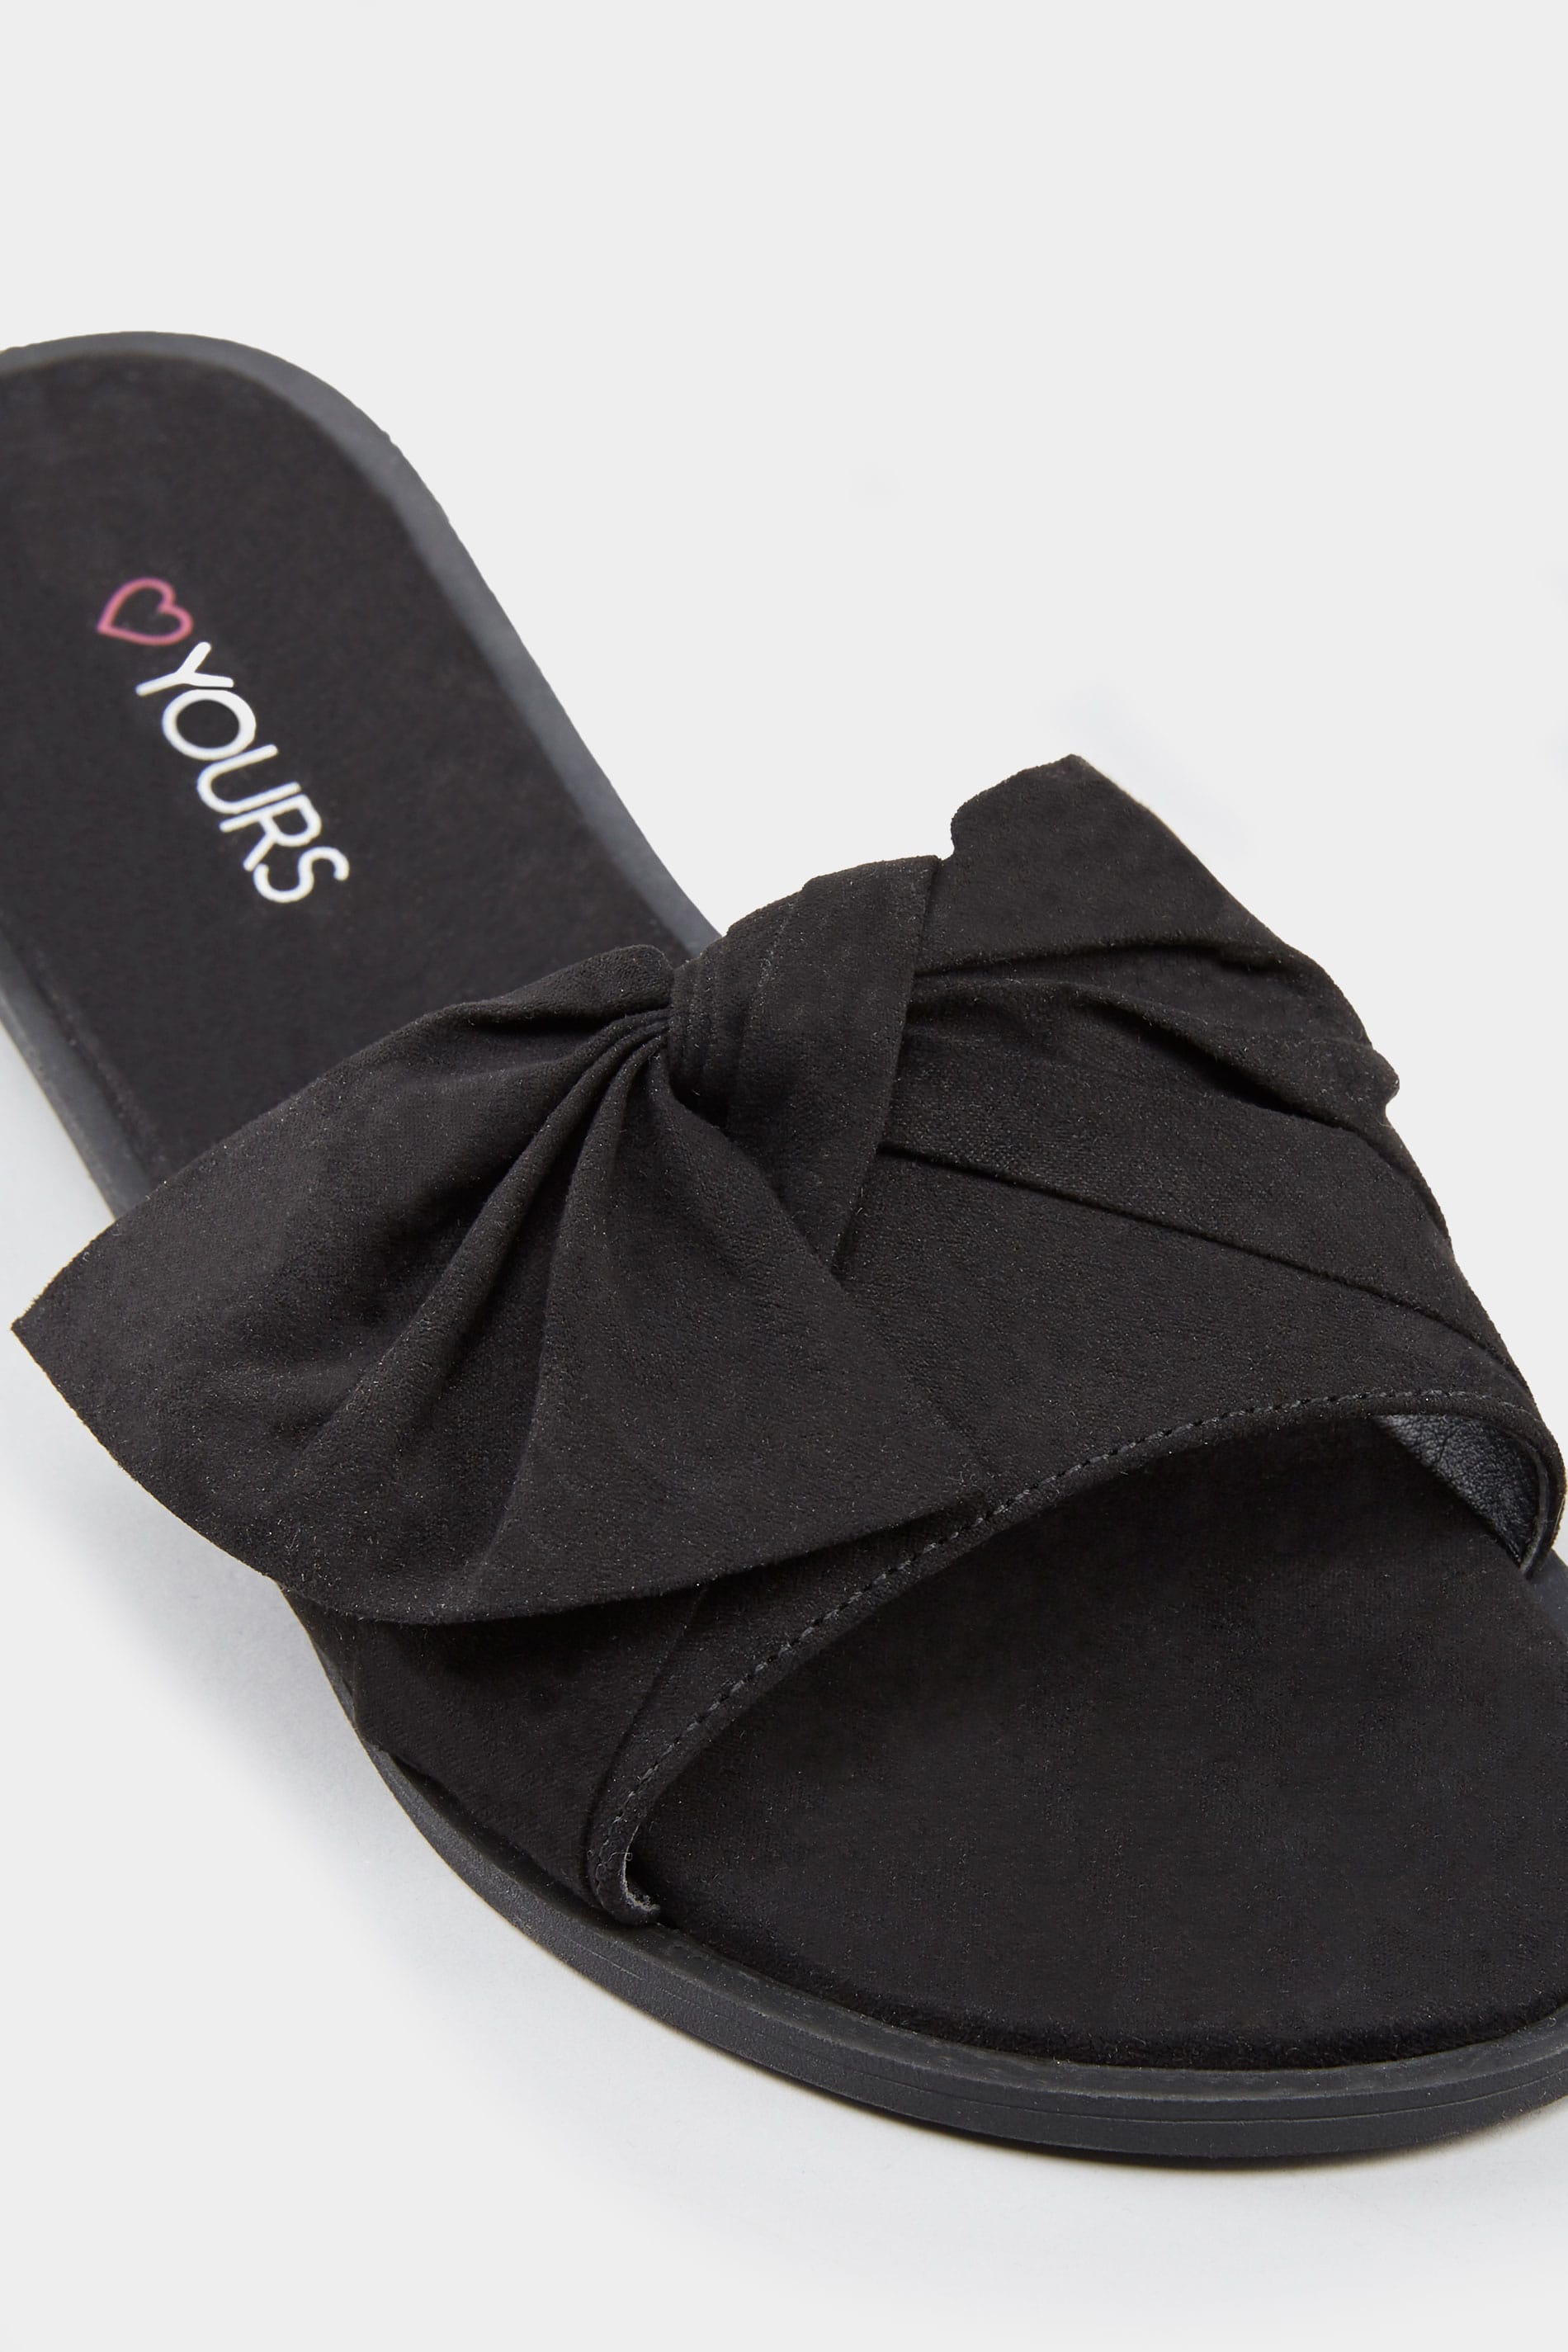 Black Bow Flat Mules | Wide Fit Sizes 5EEE to 10EEE | Yours Clothing